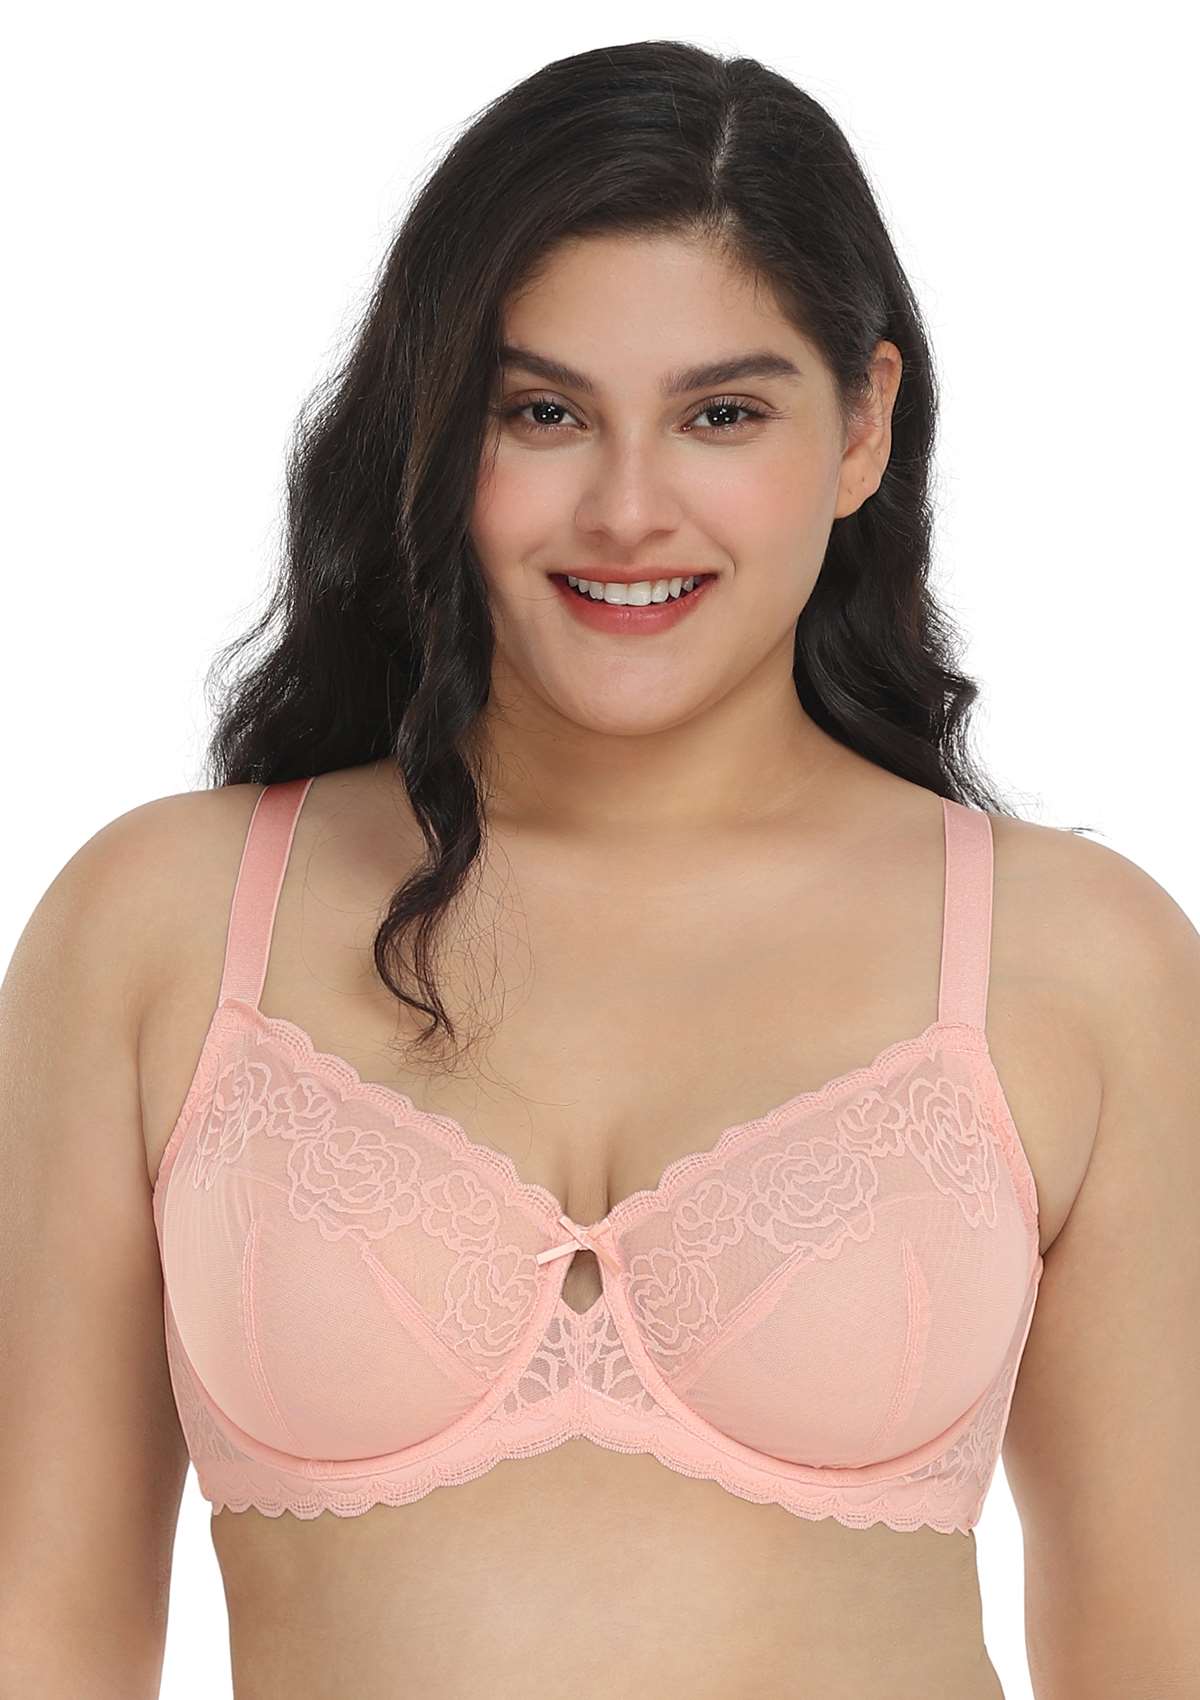 HSIA Rosa Bonica Sheer Lace Mesh Unlined Thin Comfy Woman Bra - Pink / 42 / C